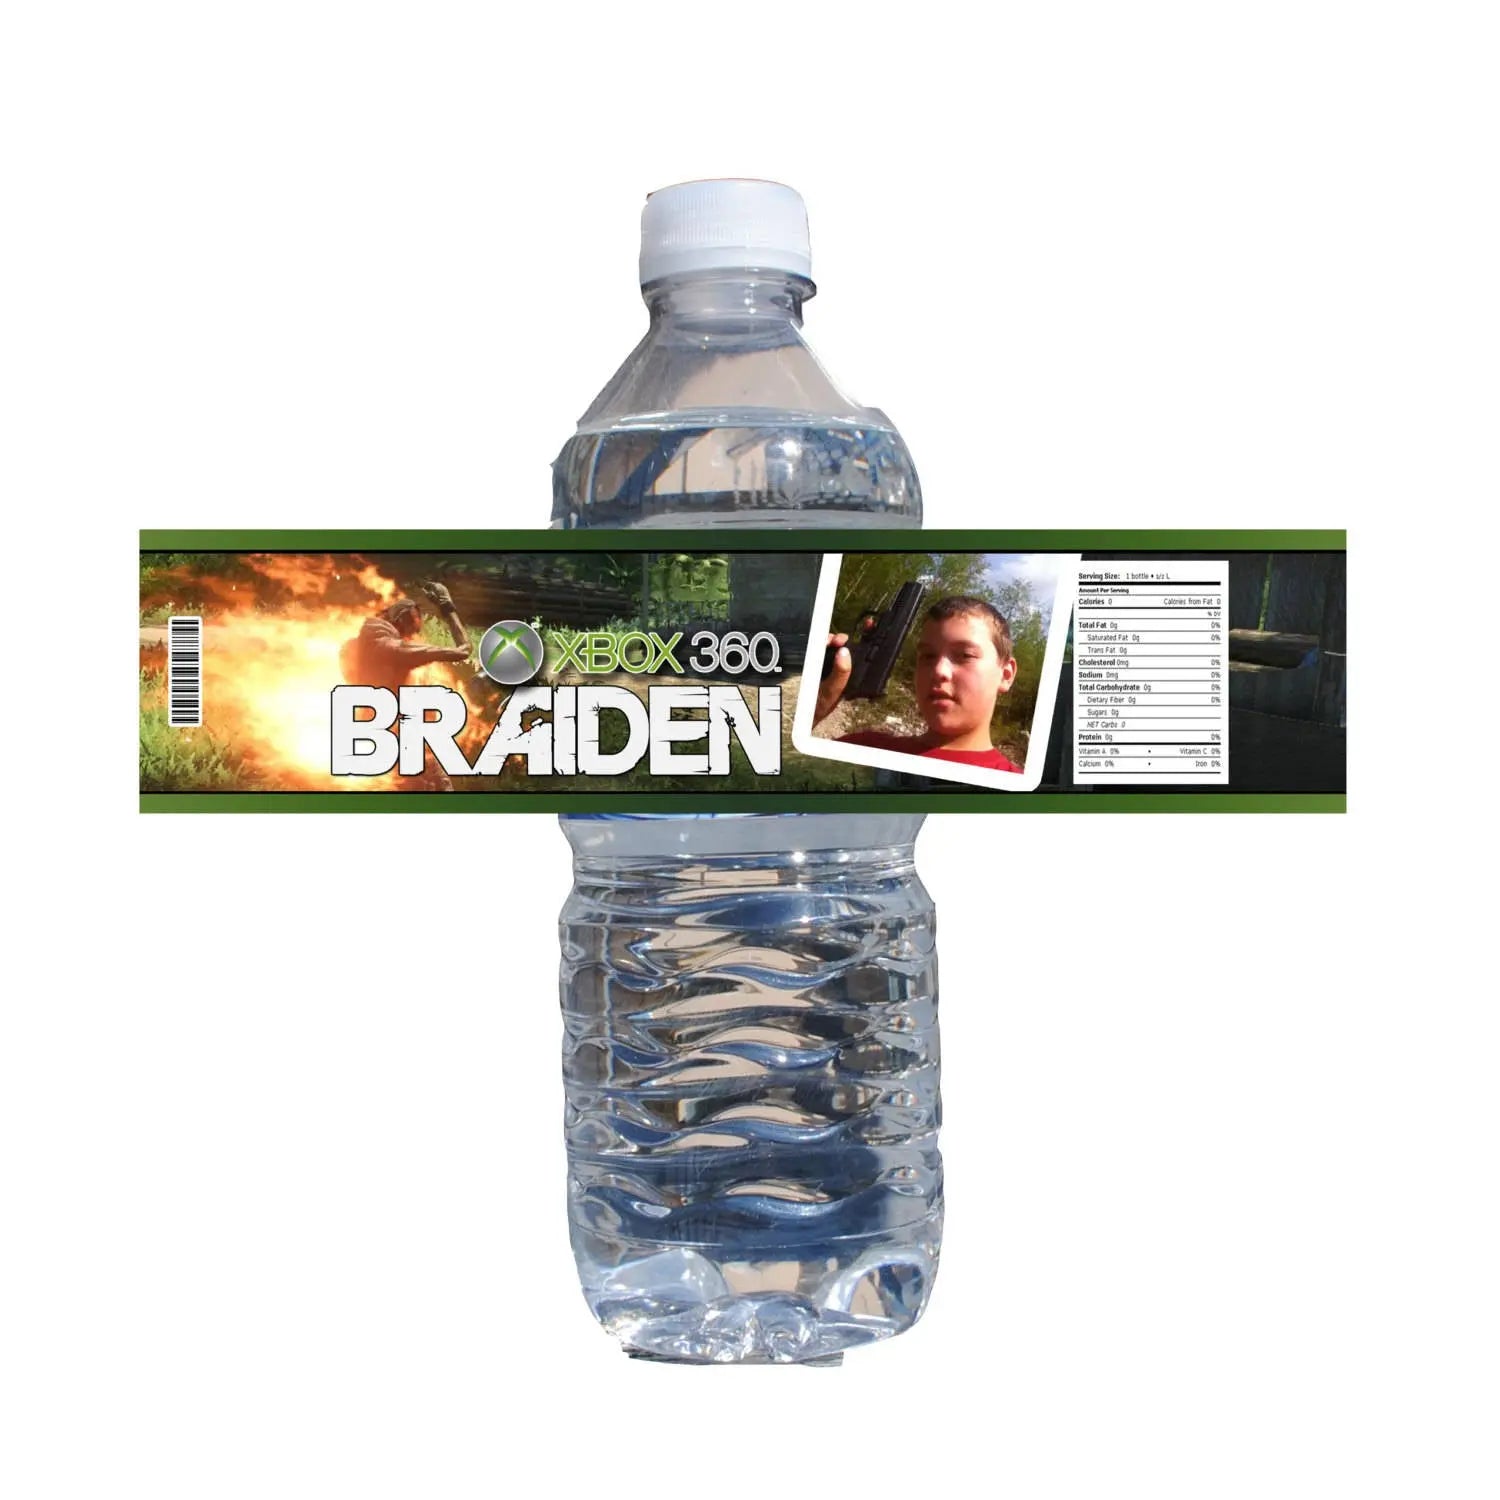 Personalized Fear Factor Theme Water Bottle Labels - DIGITAL or PRINTED